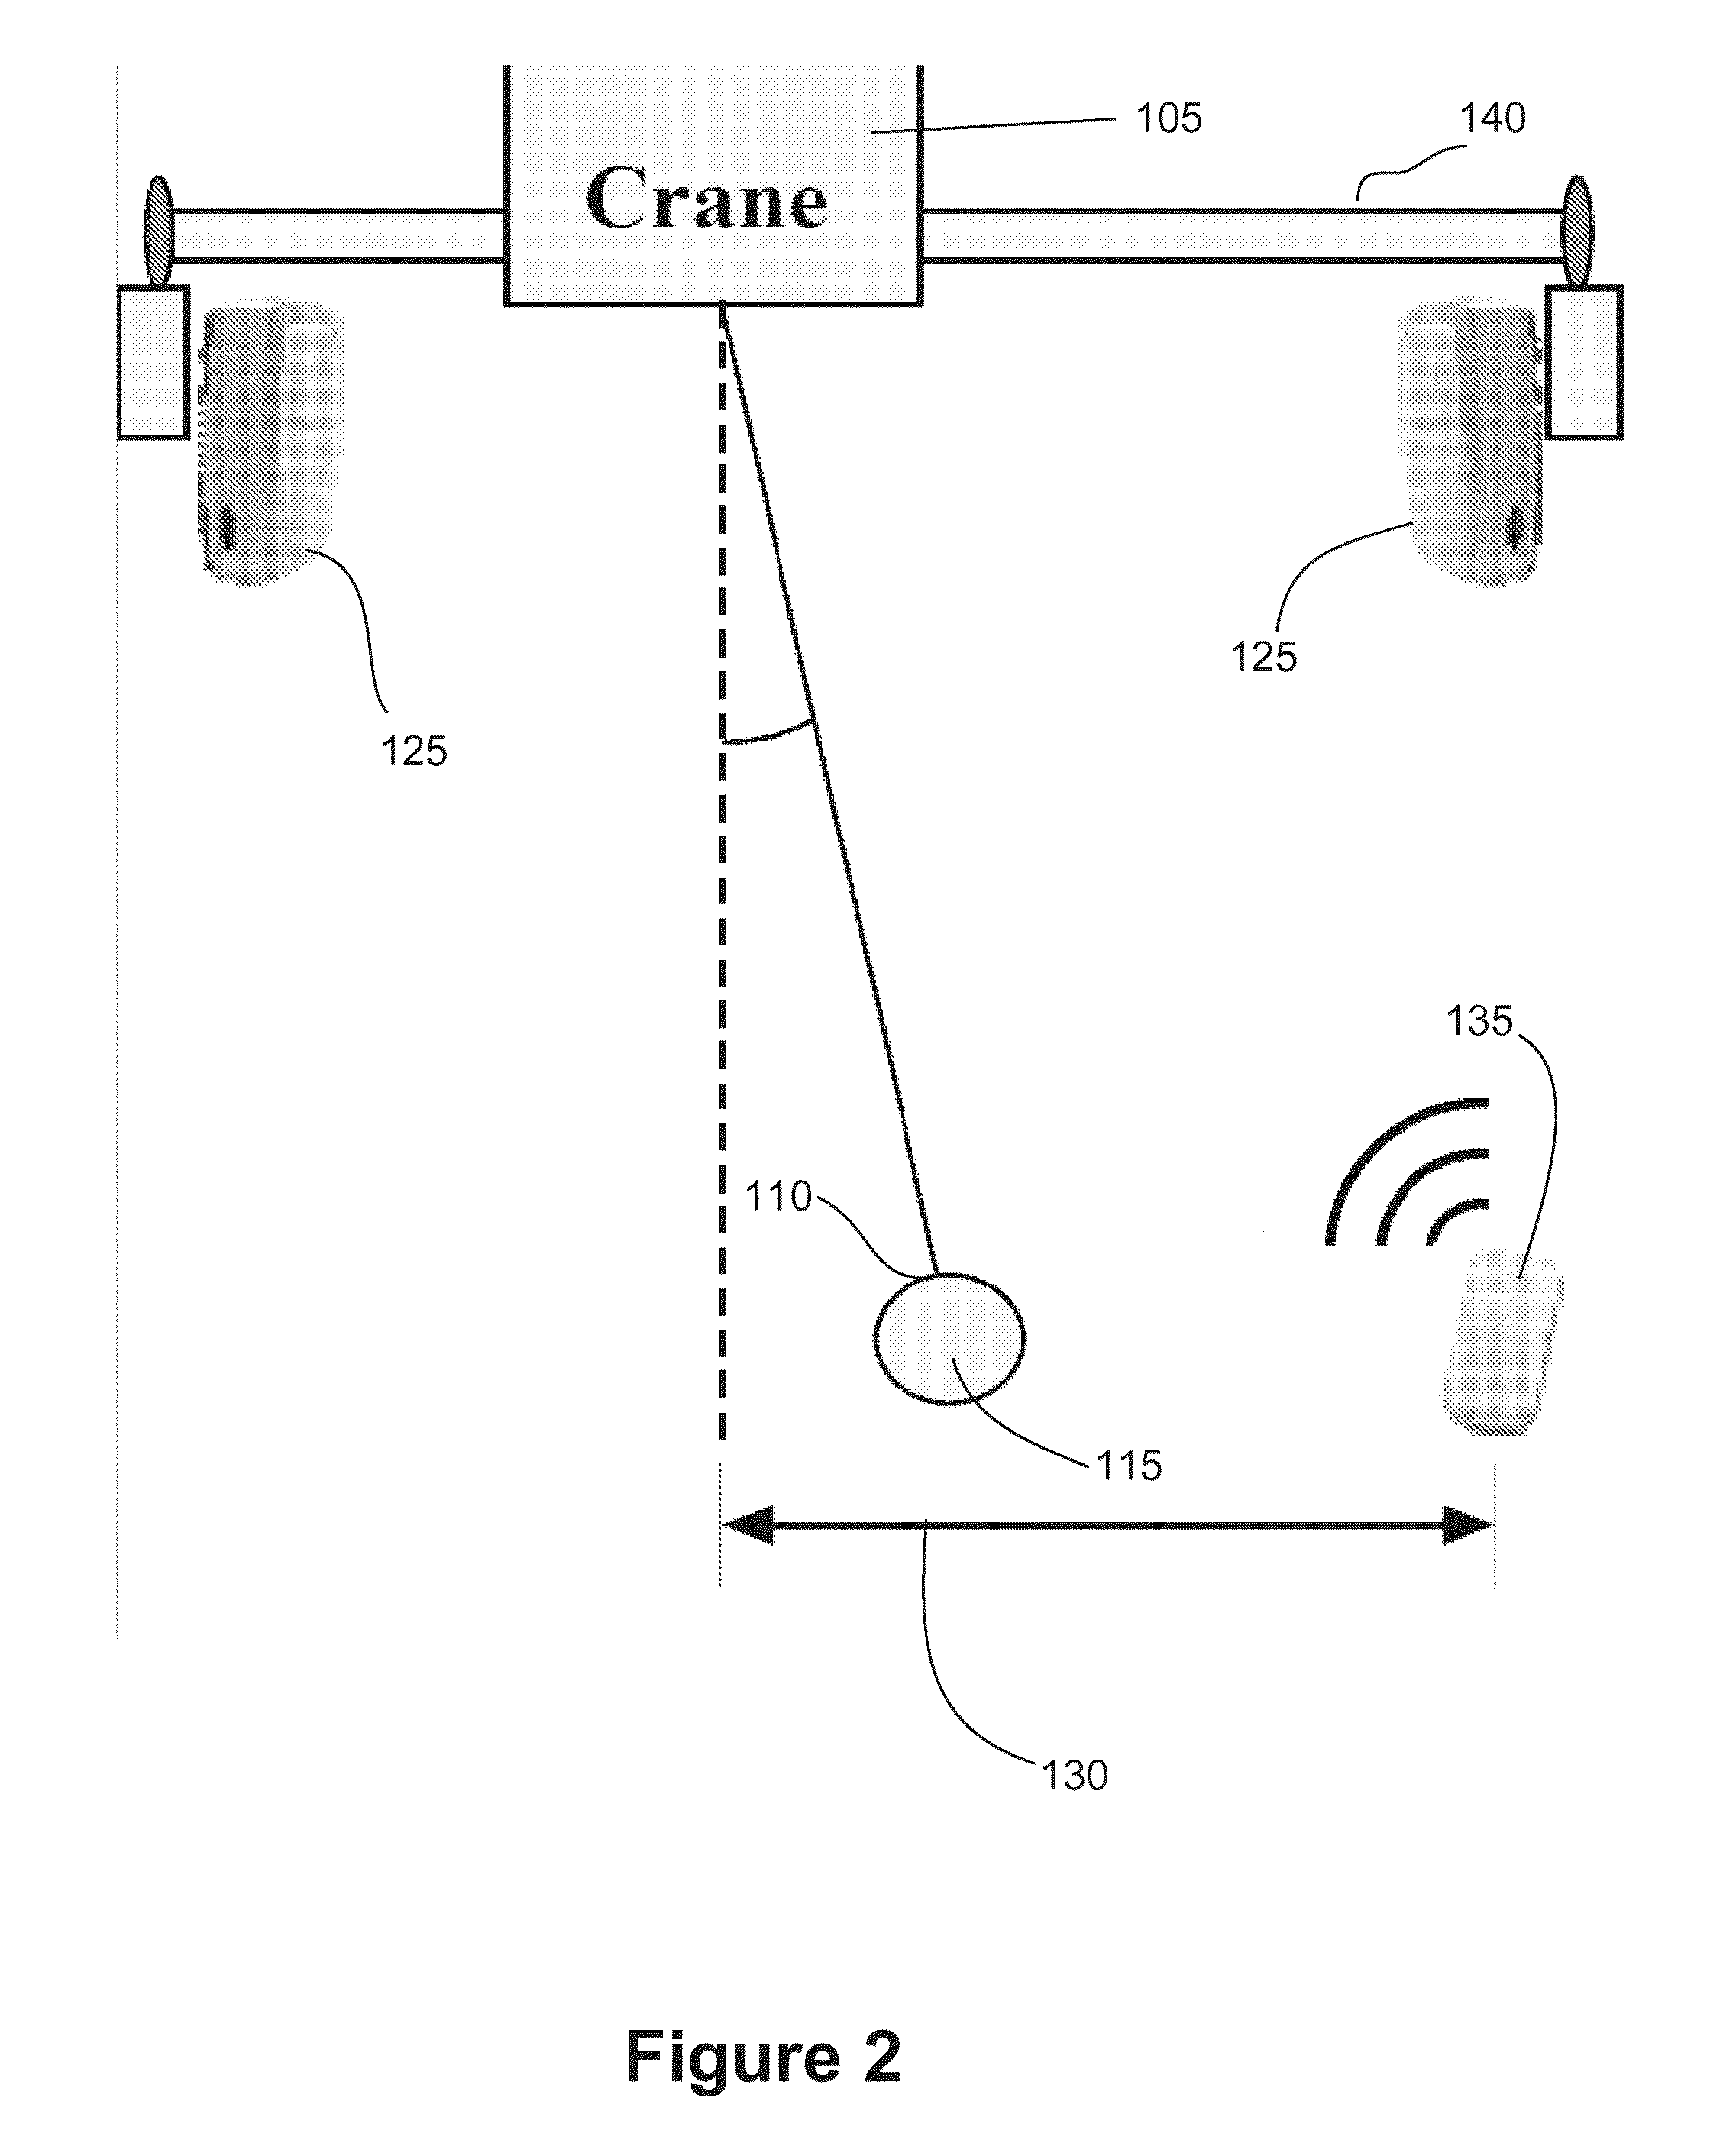 Crane control systems and methods